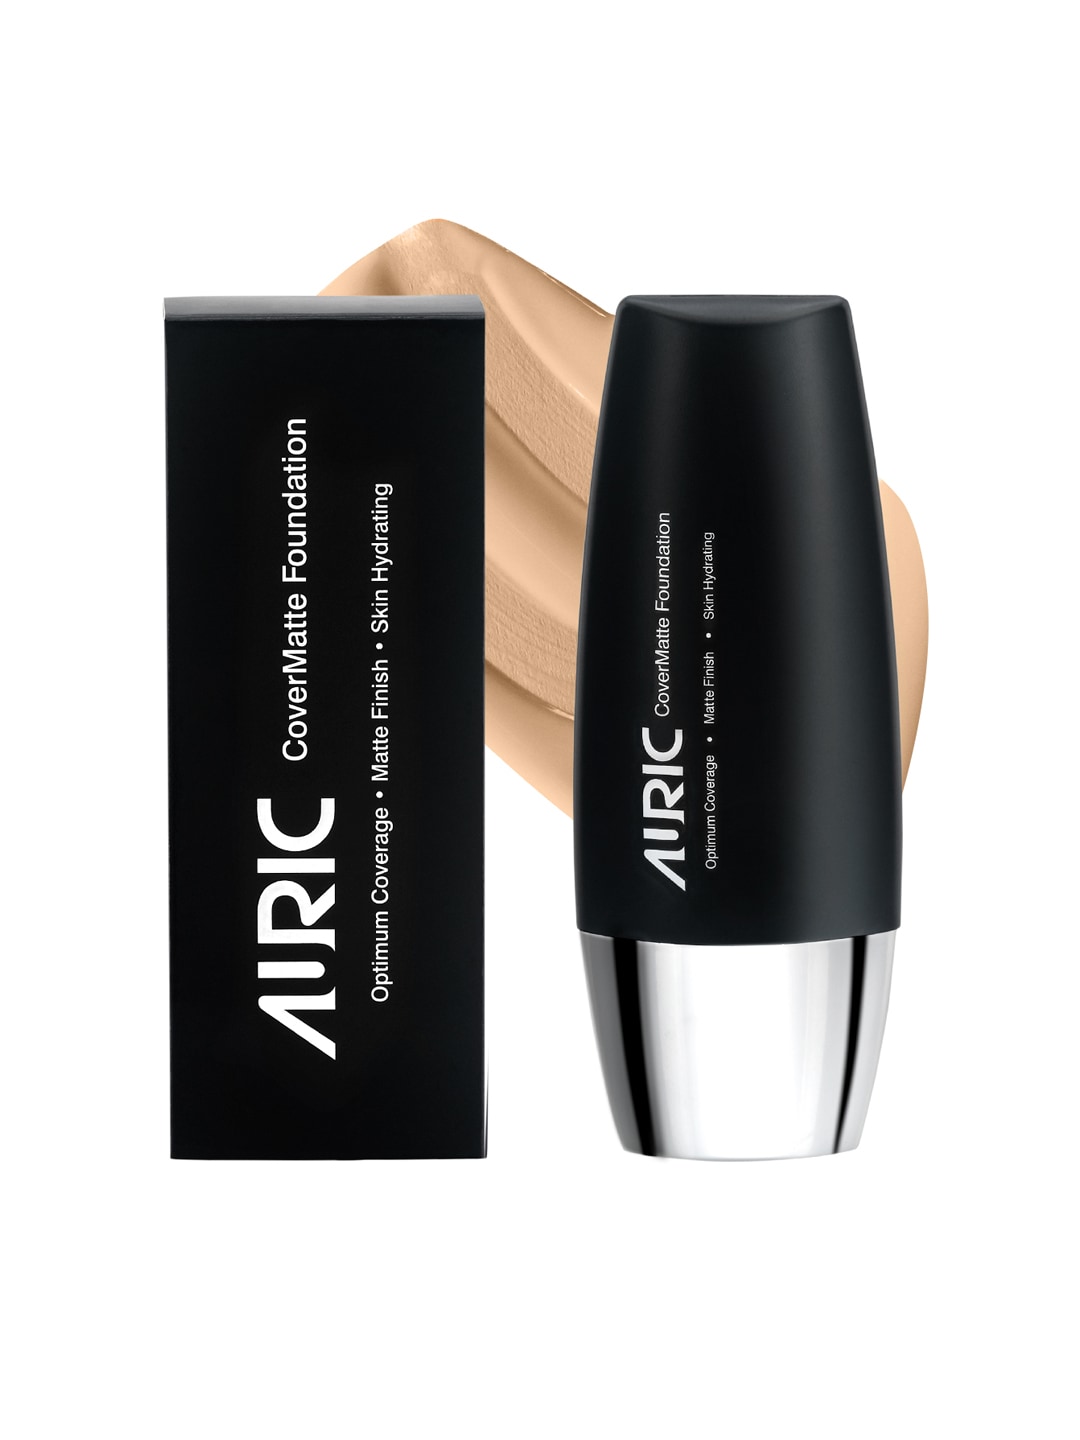 AURIC CoverMatte Foundation Light Tan 30 ml Price in India